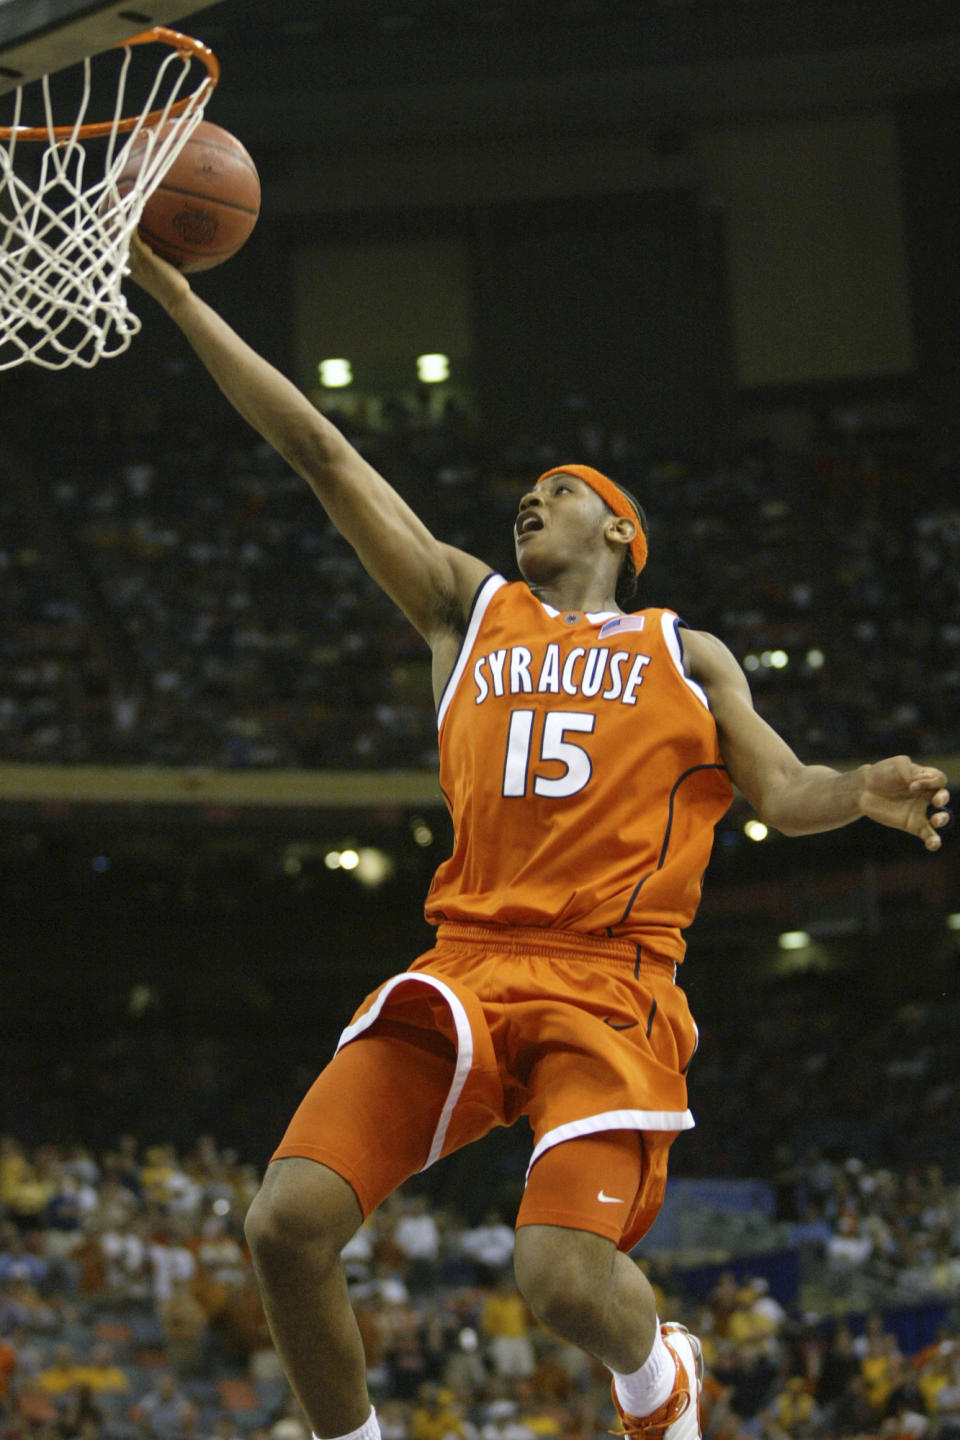 FILE - Syracuse's Carmelo Anthony puts up a layup in the closing seconds of a 95-84 win over Texas in the semifinals of the Final Four in New Orleans, April 5, 2003. Anthony got better as Syracuse went deeper into the tournament, scoring 33 points in the Final Four against Texas and finished with 20 and 10 rebounds against Kansas for the Orange's first national title. (AP Photo/Michael Conroy, File)